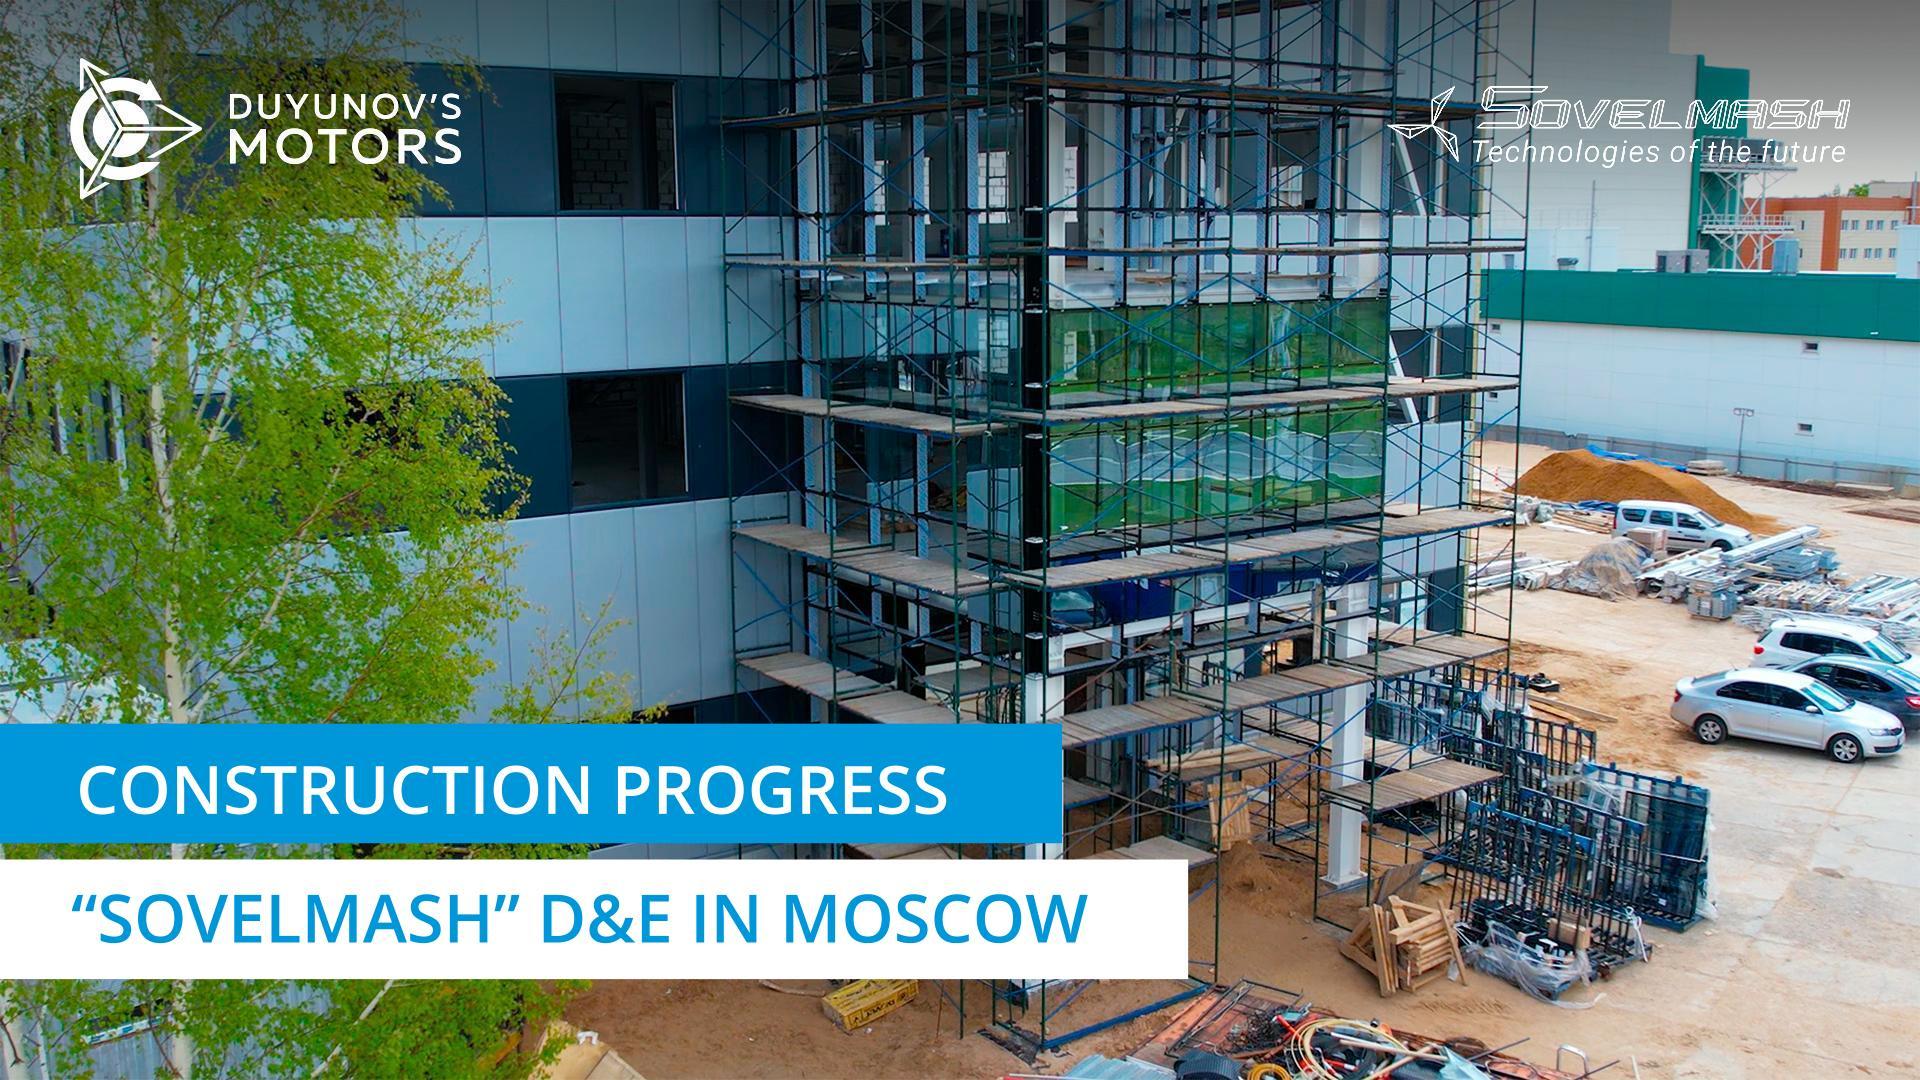 Progress of the "Sovelmash" D&E construction in Moscow | "Duyunov's motors" project